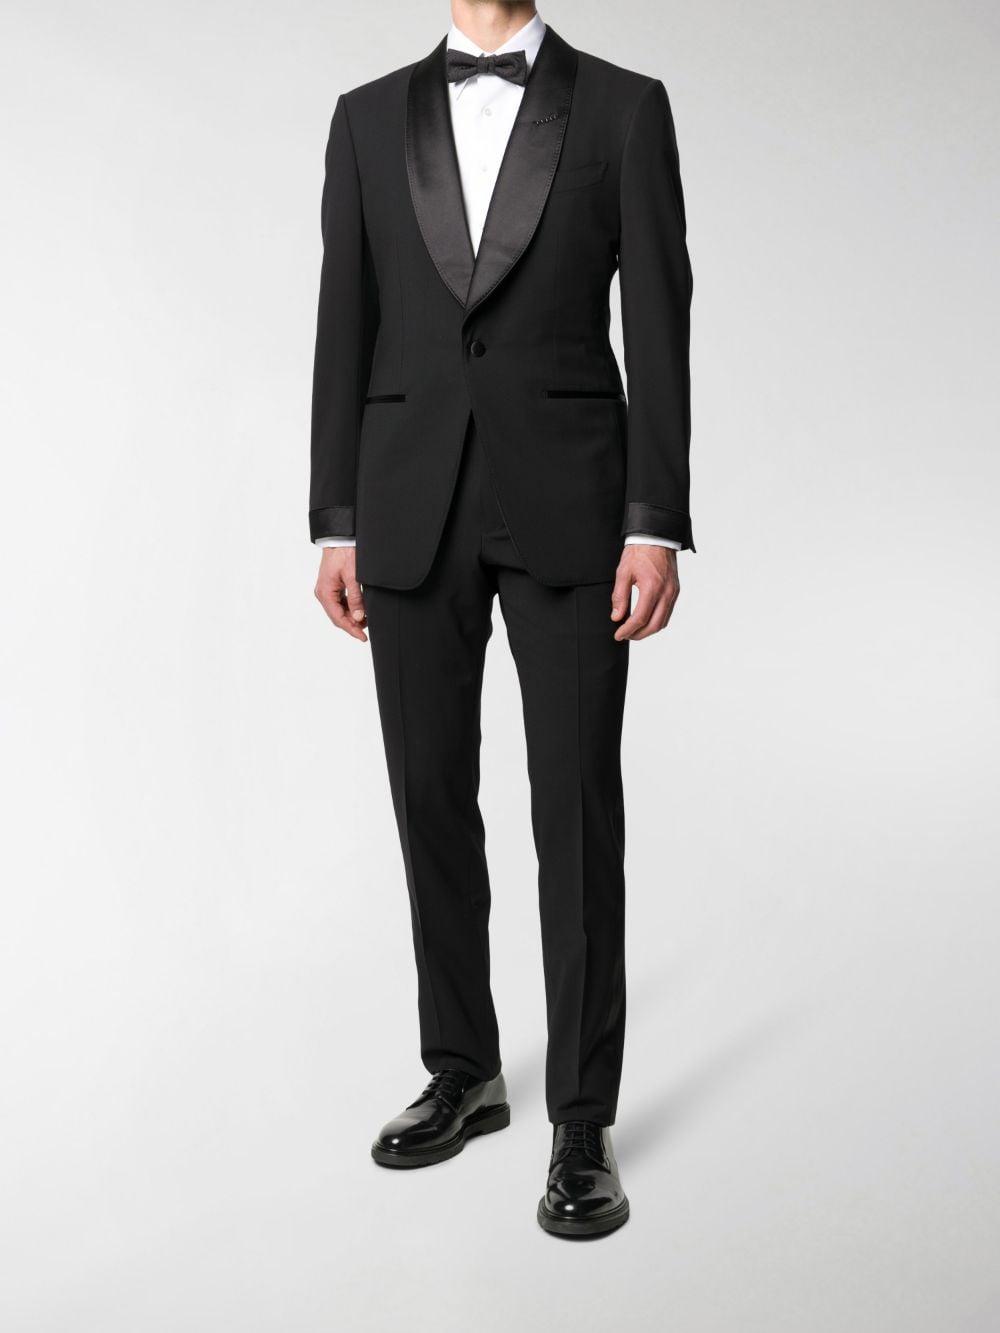 Tom Ford Contrasting-trim Two-piece Suit in Black for Men - Lyst